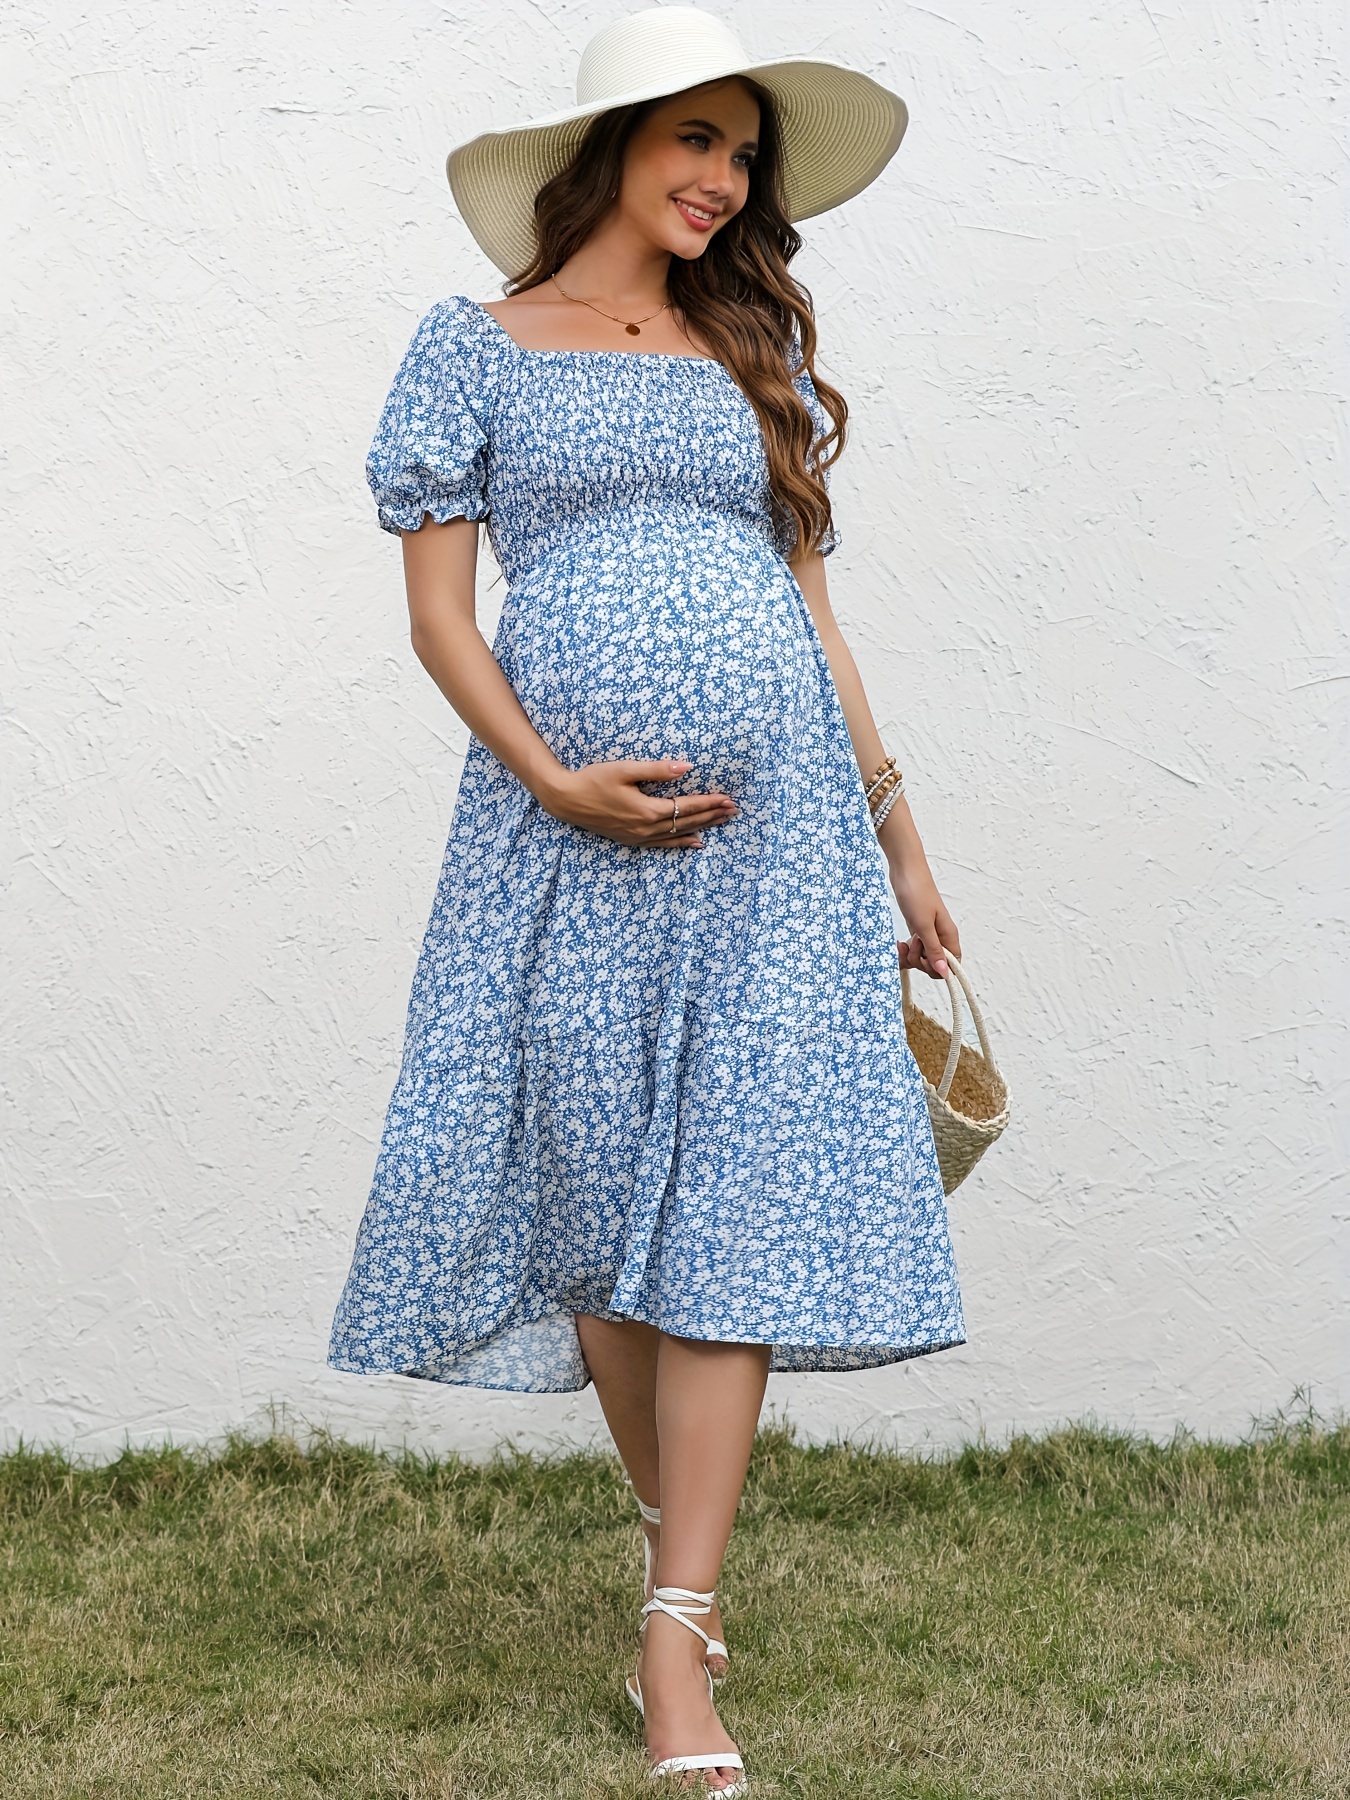 Edvintorg Cute Maternity Dresses For Pregnant Women Clearance Sleeveless  Medium Long Cartoon Printed Round Neck Pregnant Dress Summer Casual Pregnancy  Clothes 